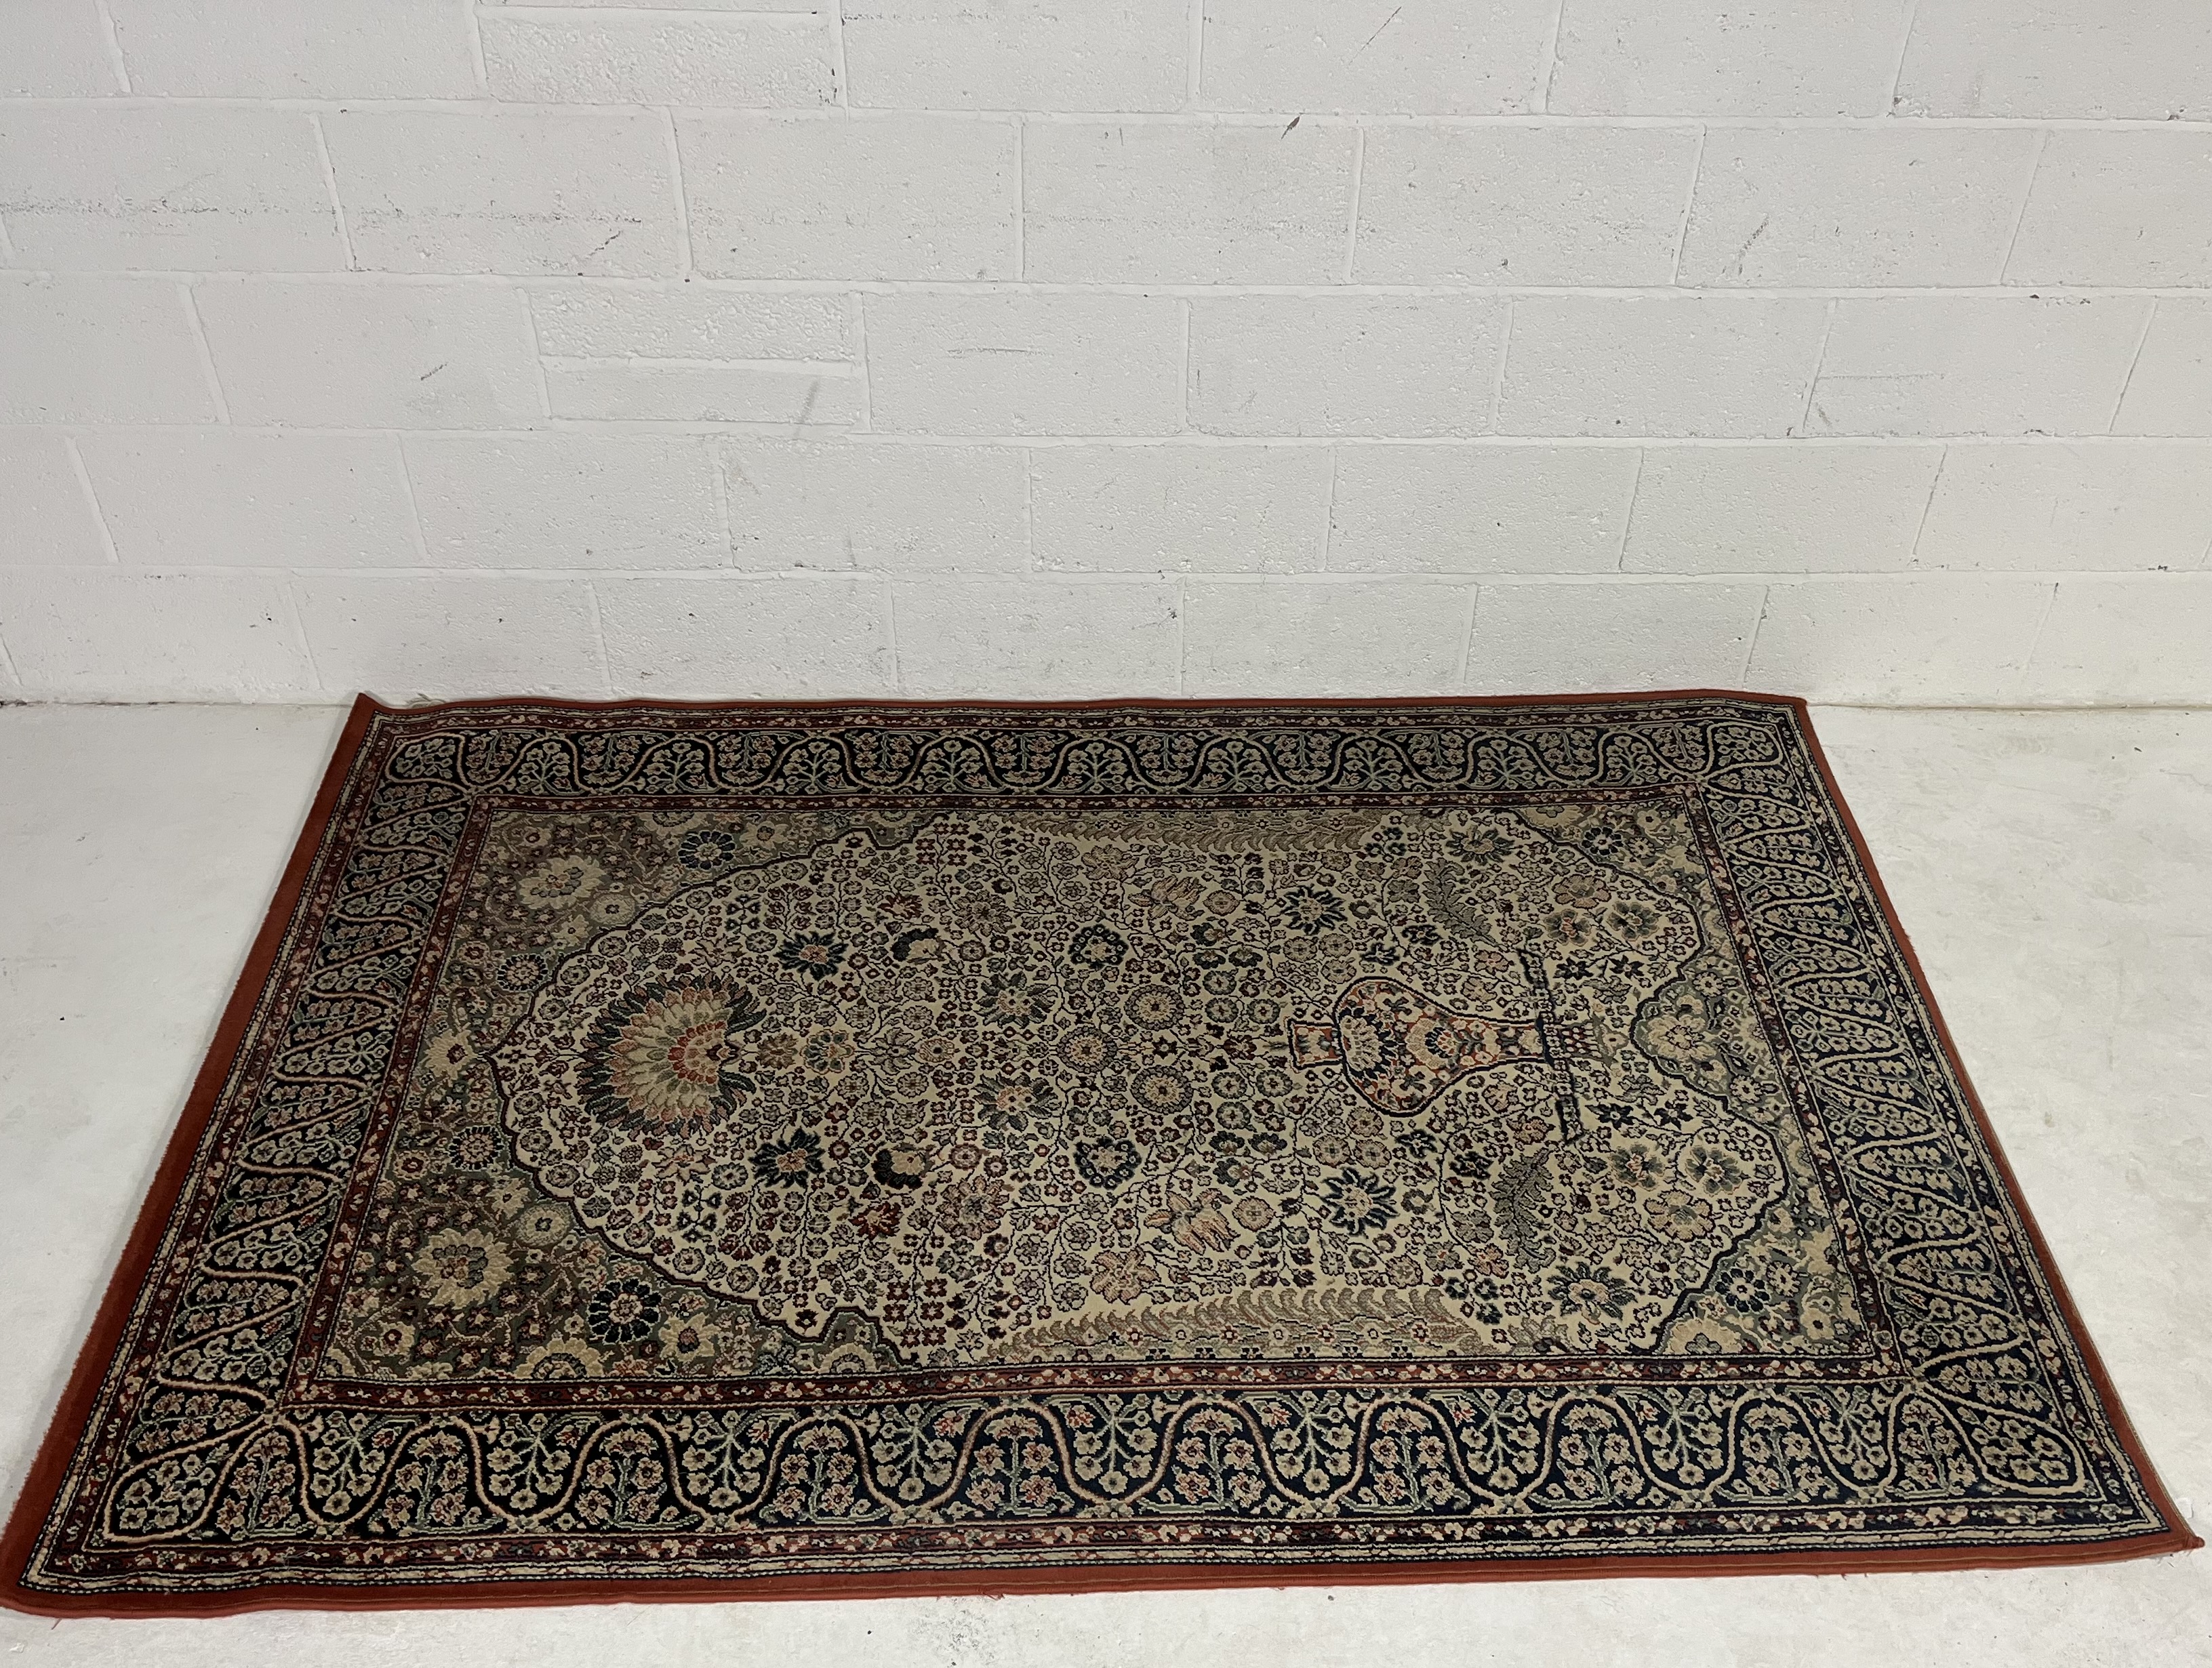 Two Eastern style rugs, Multi pattern 160 cm wide x 230 cm length, Cream ground with central - Image 3 of 4